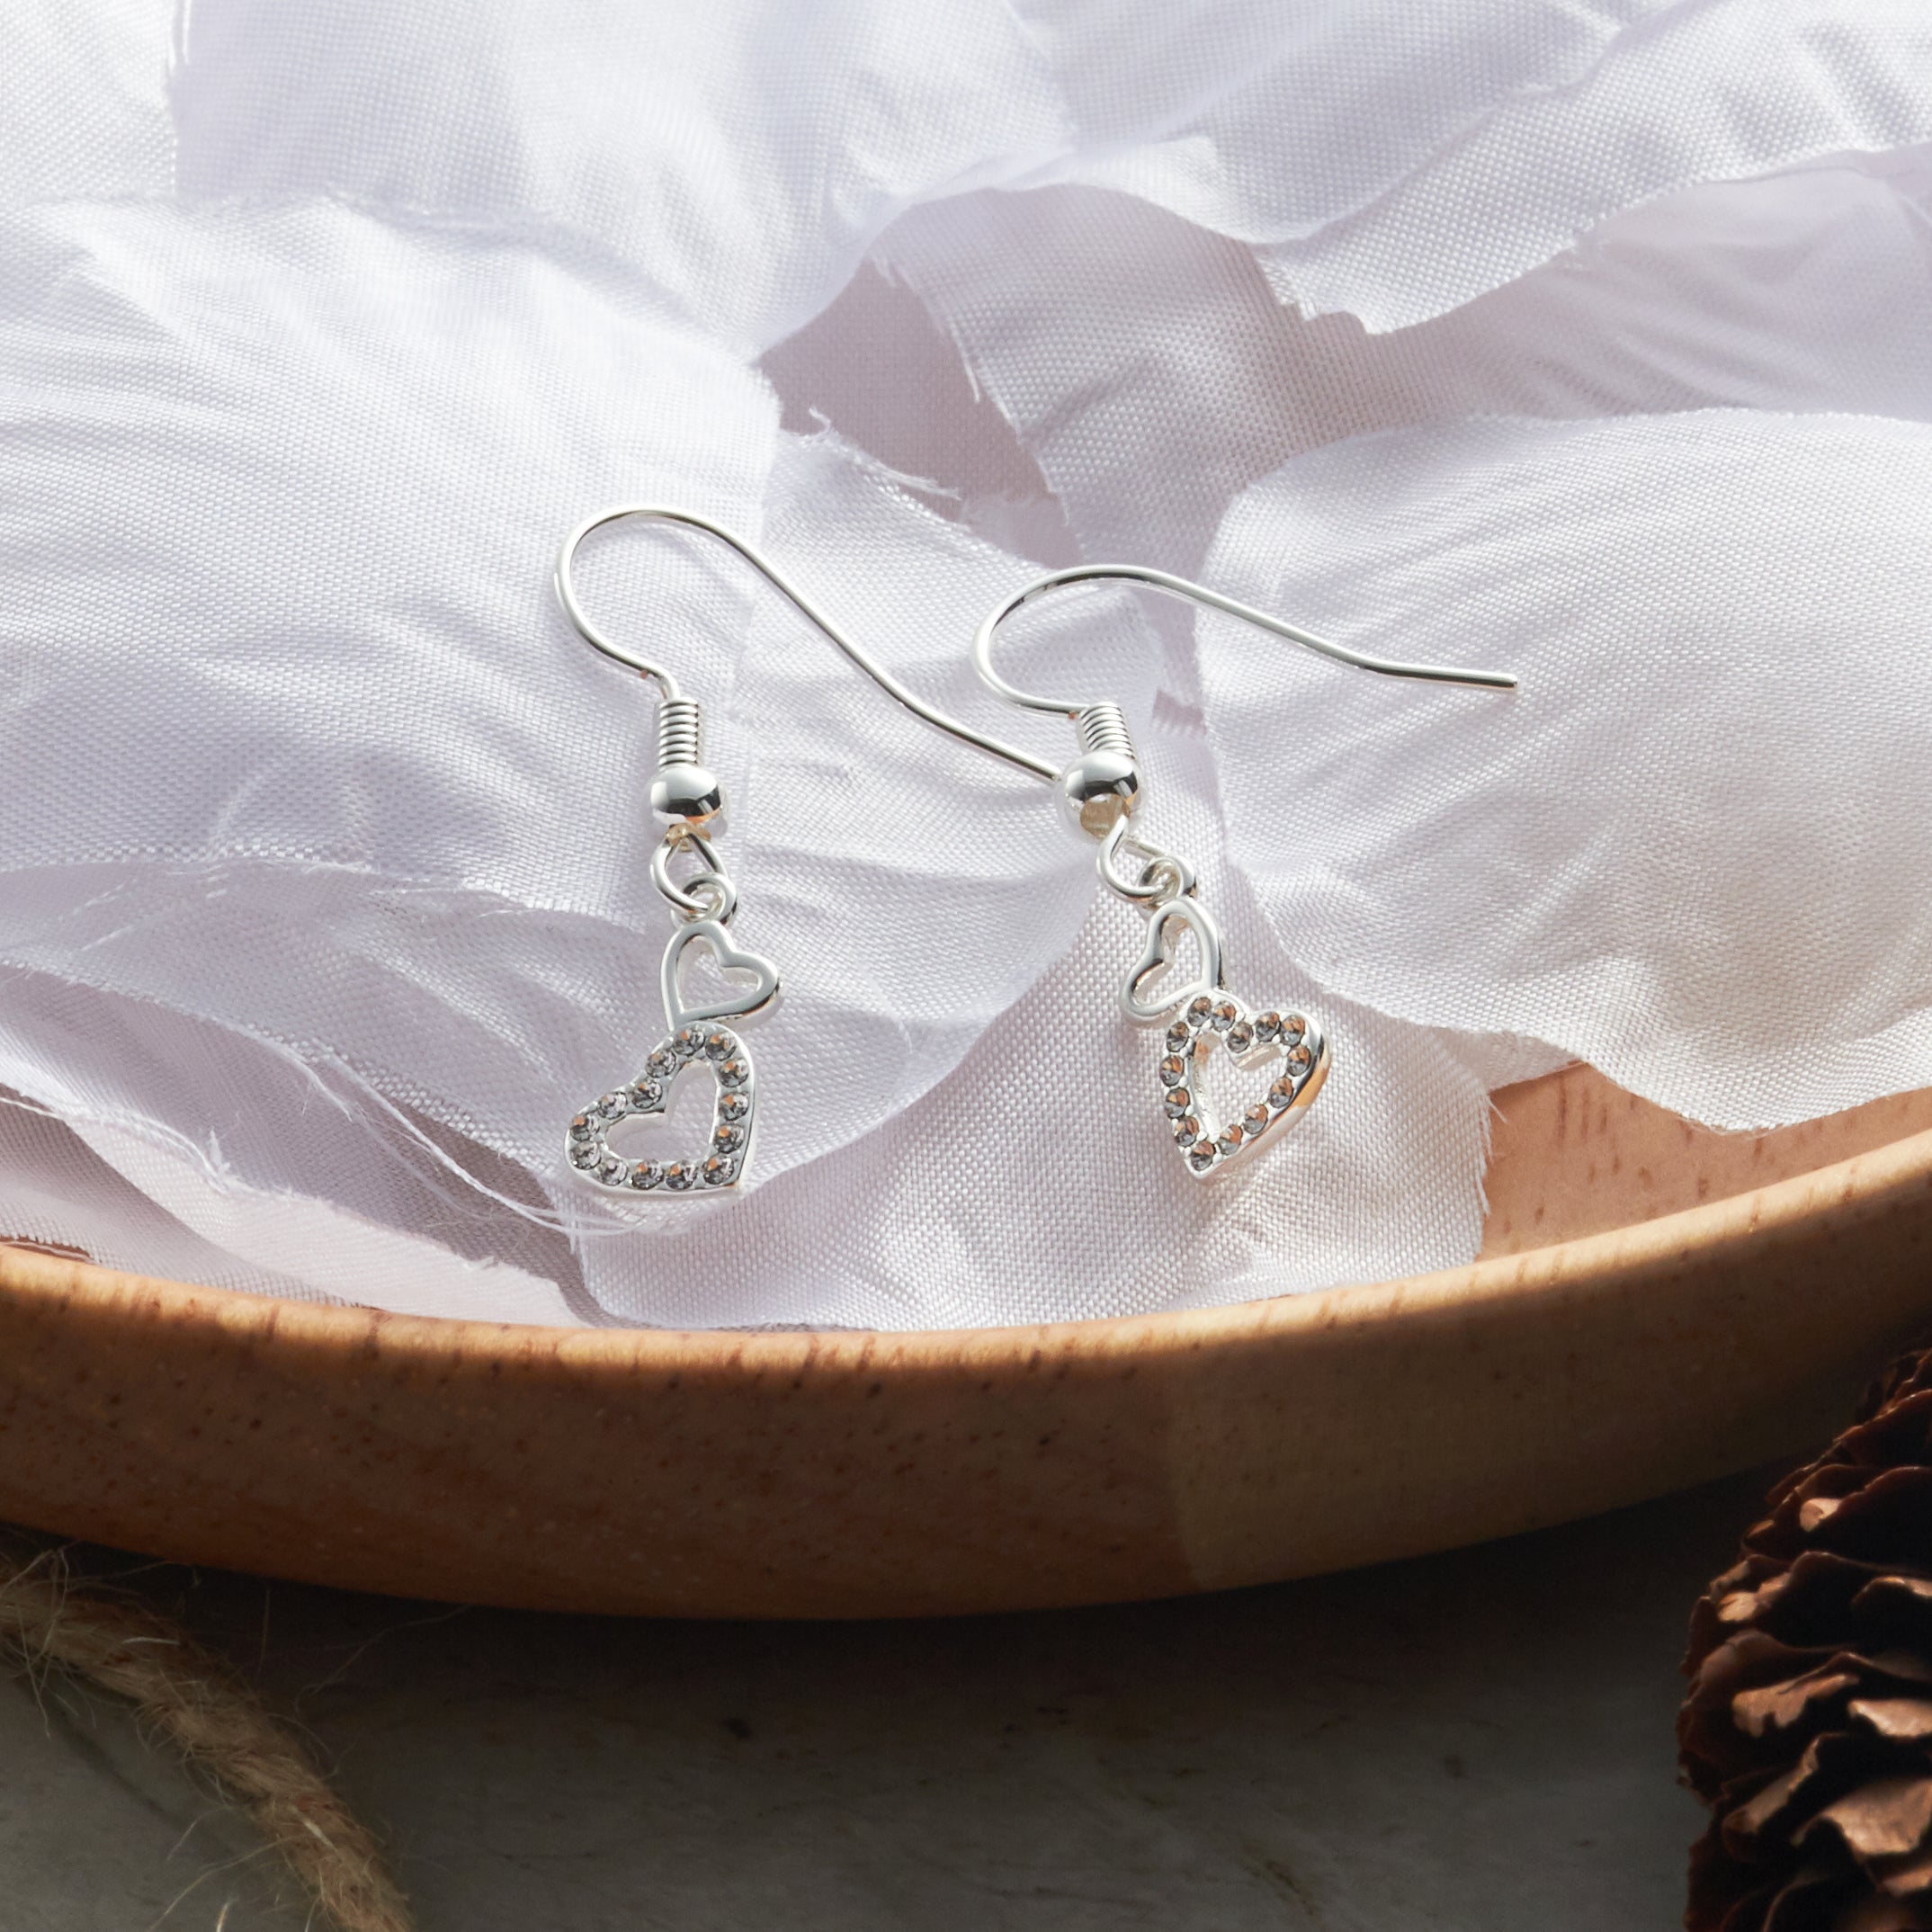 Silver Plated Double Heart Drop Earrings Created with Zircondia® Crystals